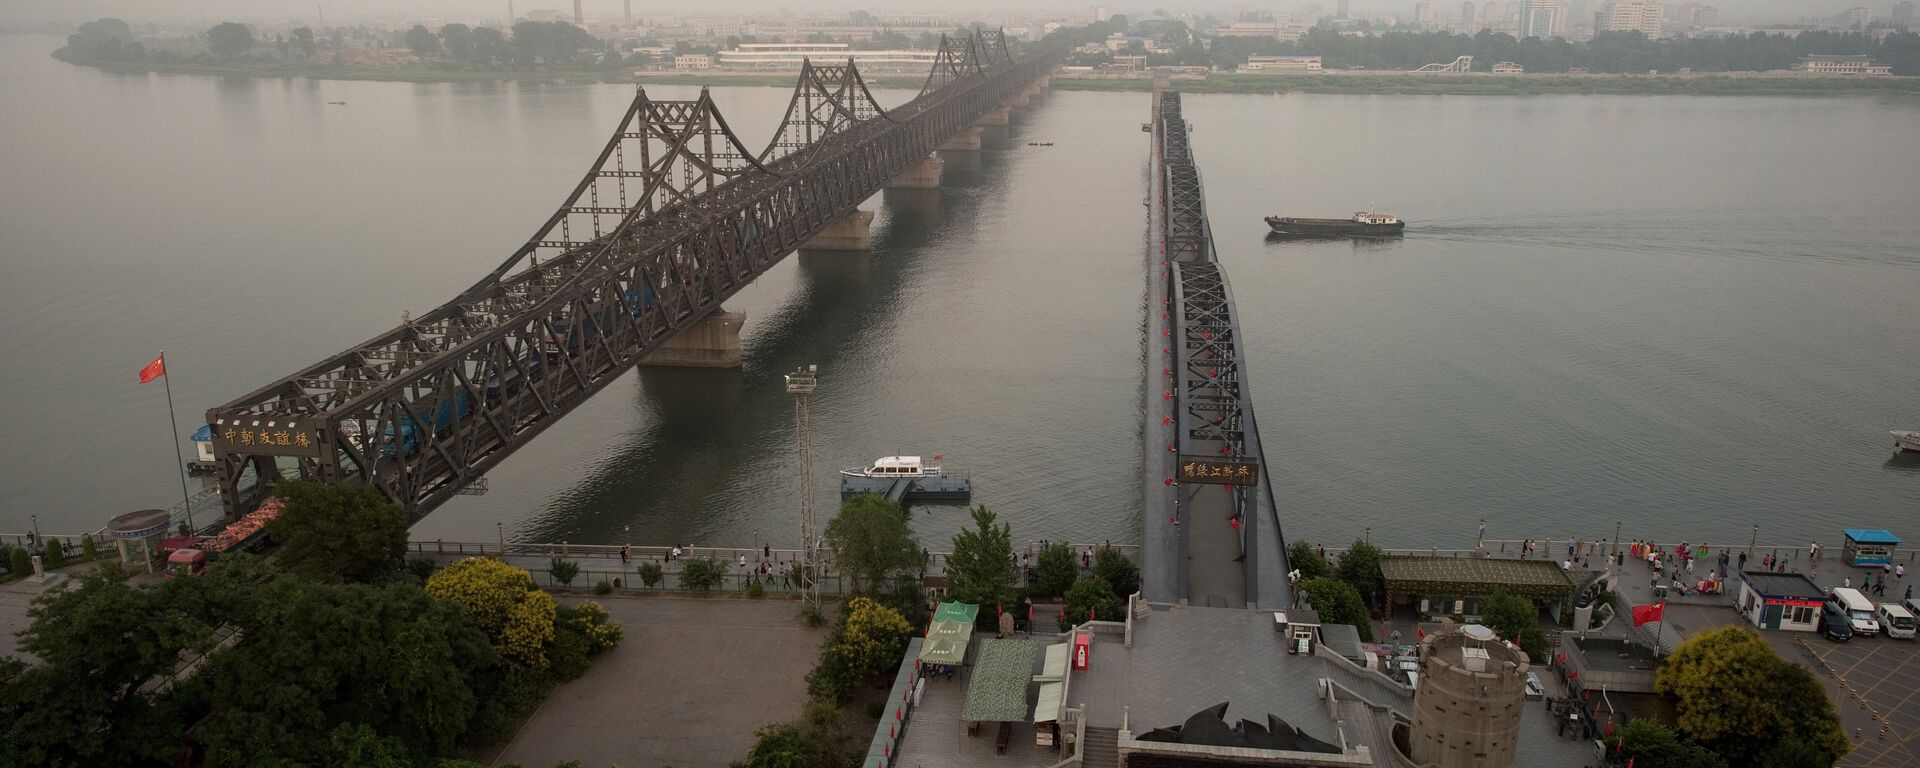 The sun sets over the Friendship bridge on the Yalu River connecting the North Korean town of Sinuiju and Dandong in Chinese border city of Dandong on July 5, 2017 - Sputnik International, 1920, 04.11.2021